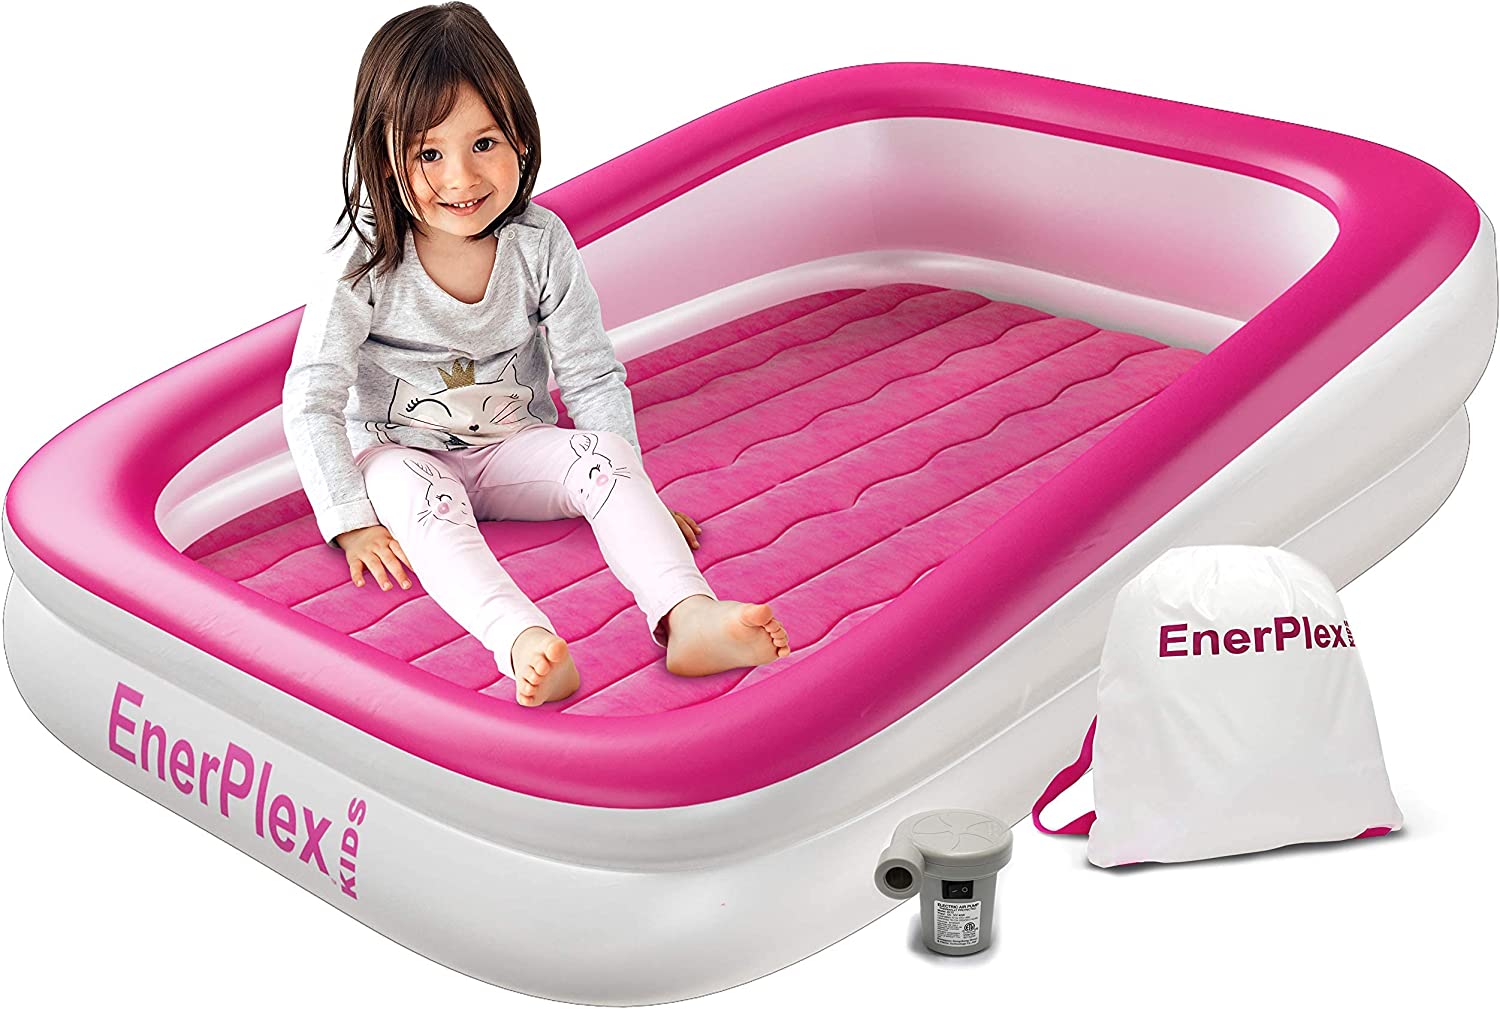 EnerPlex Kids Inflatable Travel Bed with High Speed Pump, Portable Air Mattress for Kids on The Go, Blow up Toddler Travel Bed with Sides – Built-in Safety Bumper - Pink